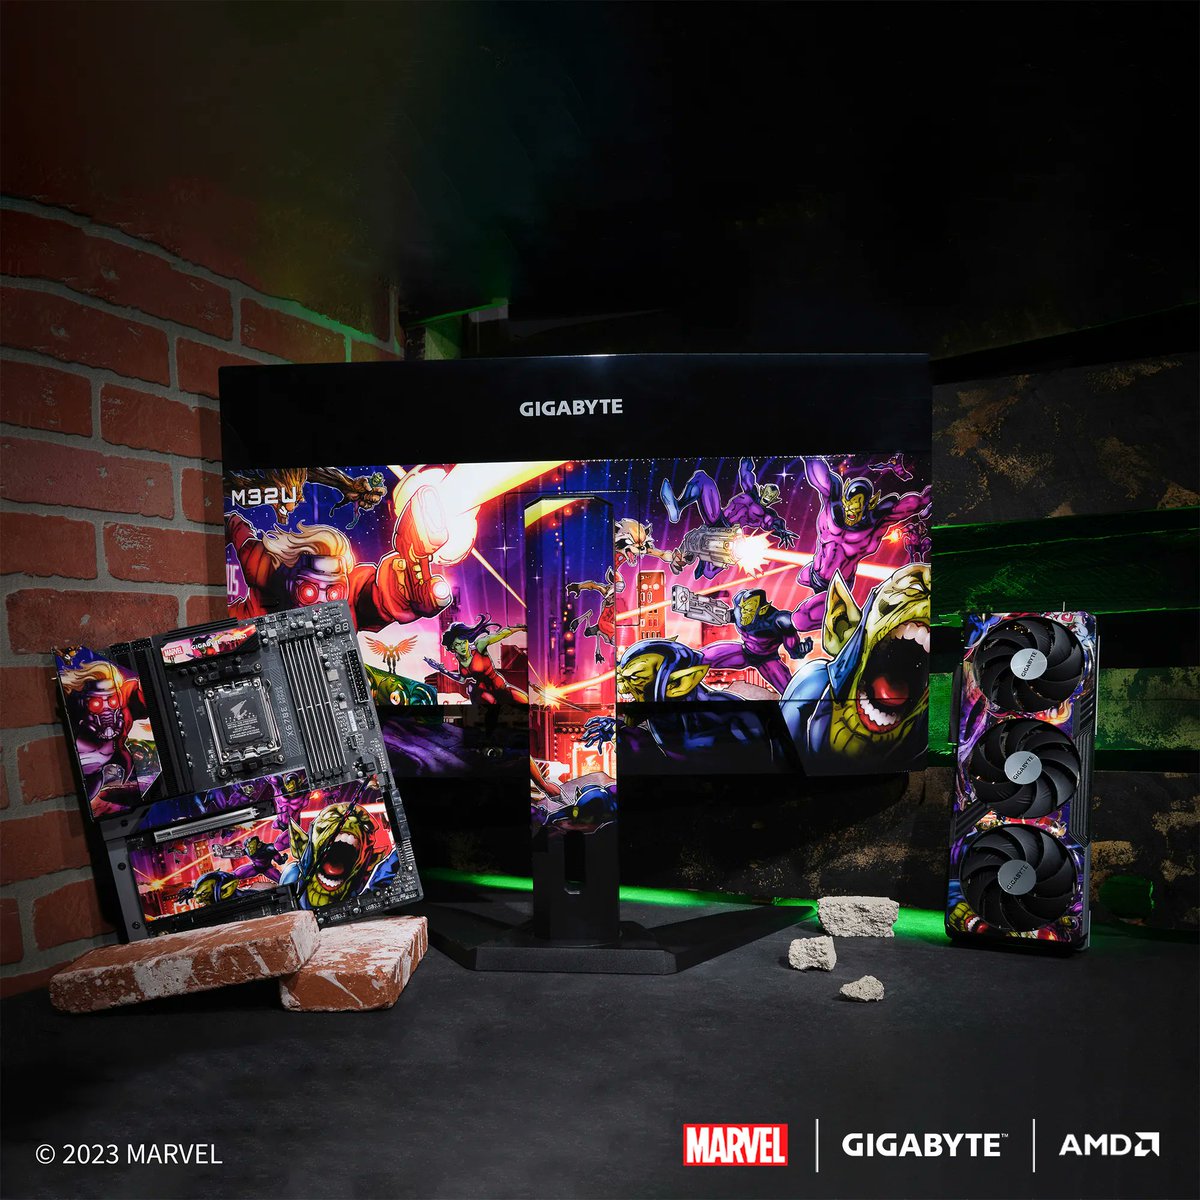 Fight those shapeshifting Skrull with @Marvel Guardians of the Galaxy! #AORUSUnleashed @AMDGaming 

Want to win this custom @AMDRyzen X670E motherboard, @amdradeon RX 7900 XTX graphics card, and monitor set? Enter here: gigabyte.com/us/aorus-unlea…